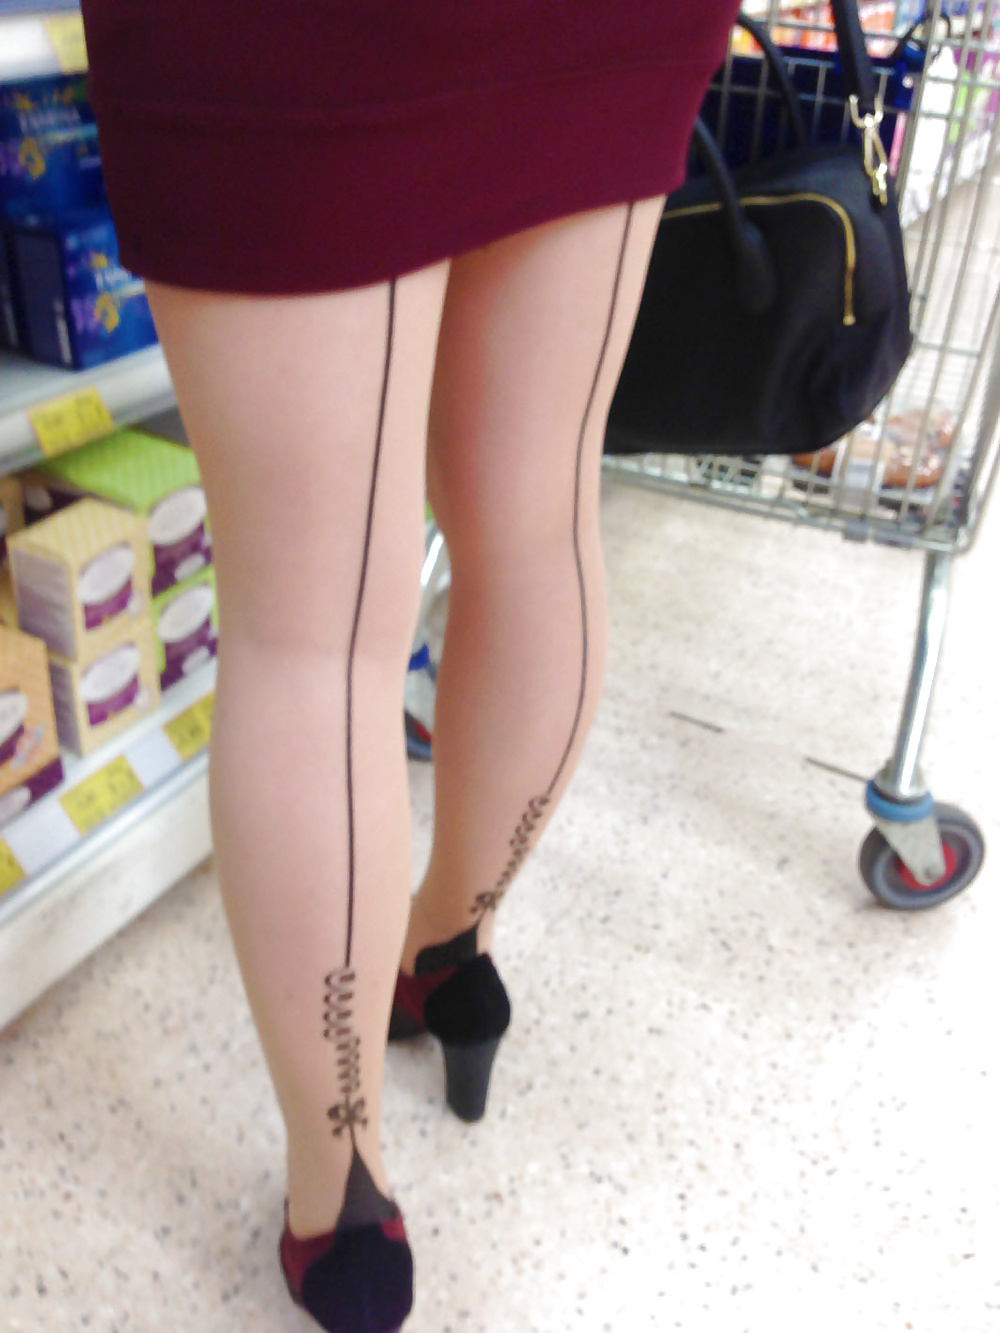 Porn image stockings ,tights and high heels